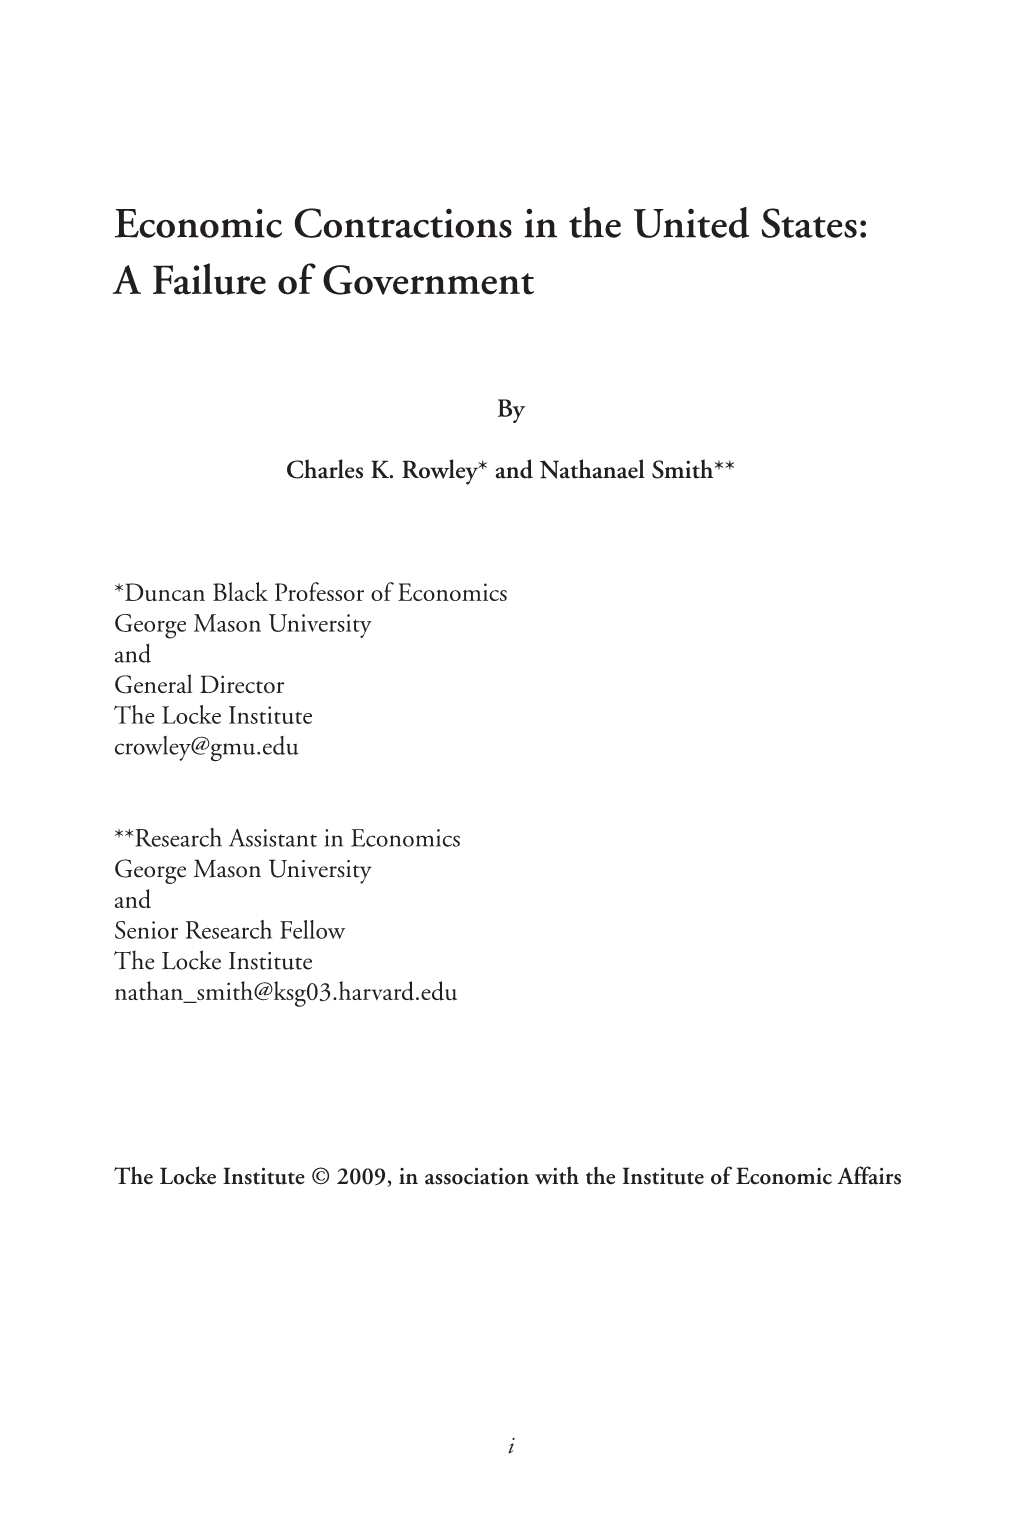 Economic Contractions in the United States: a Failure of Government